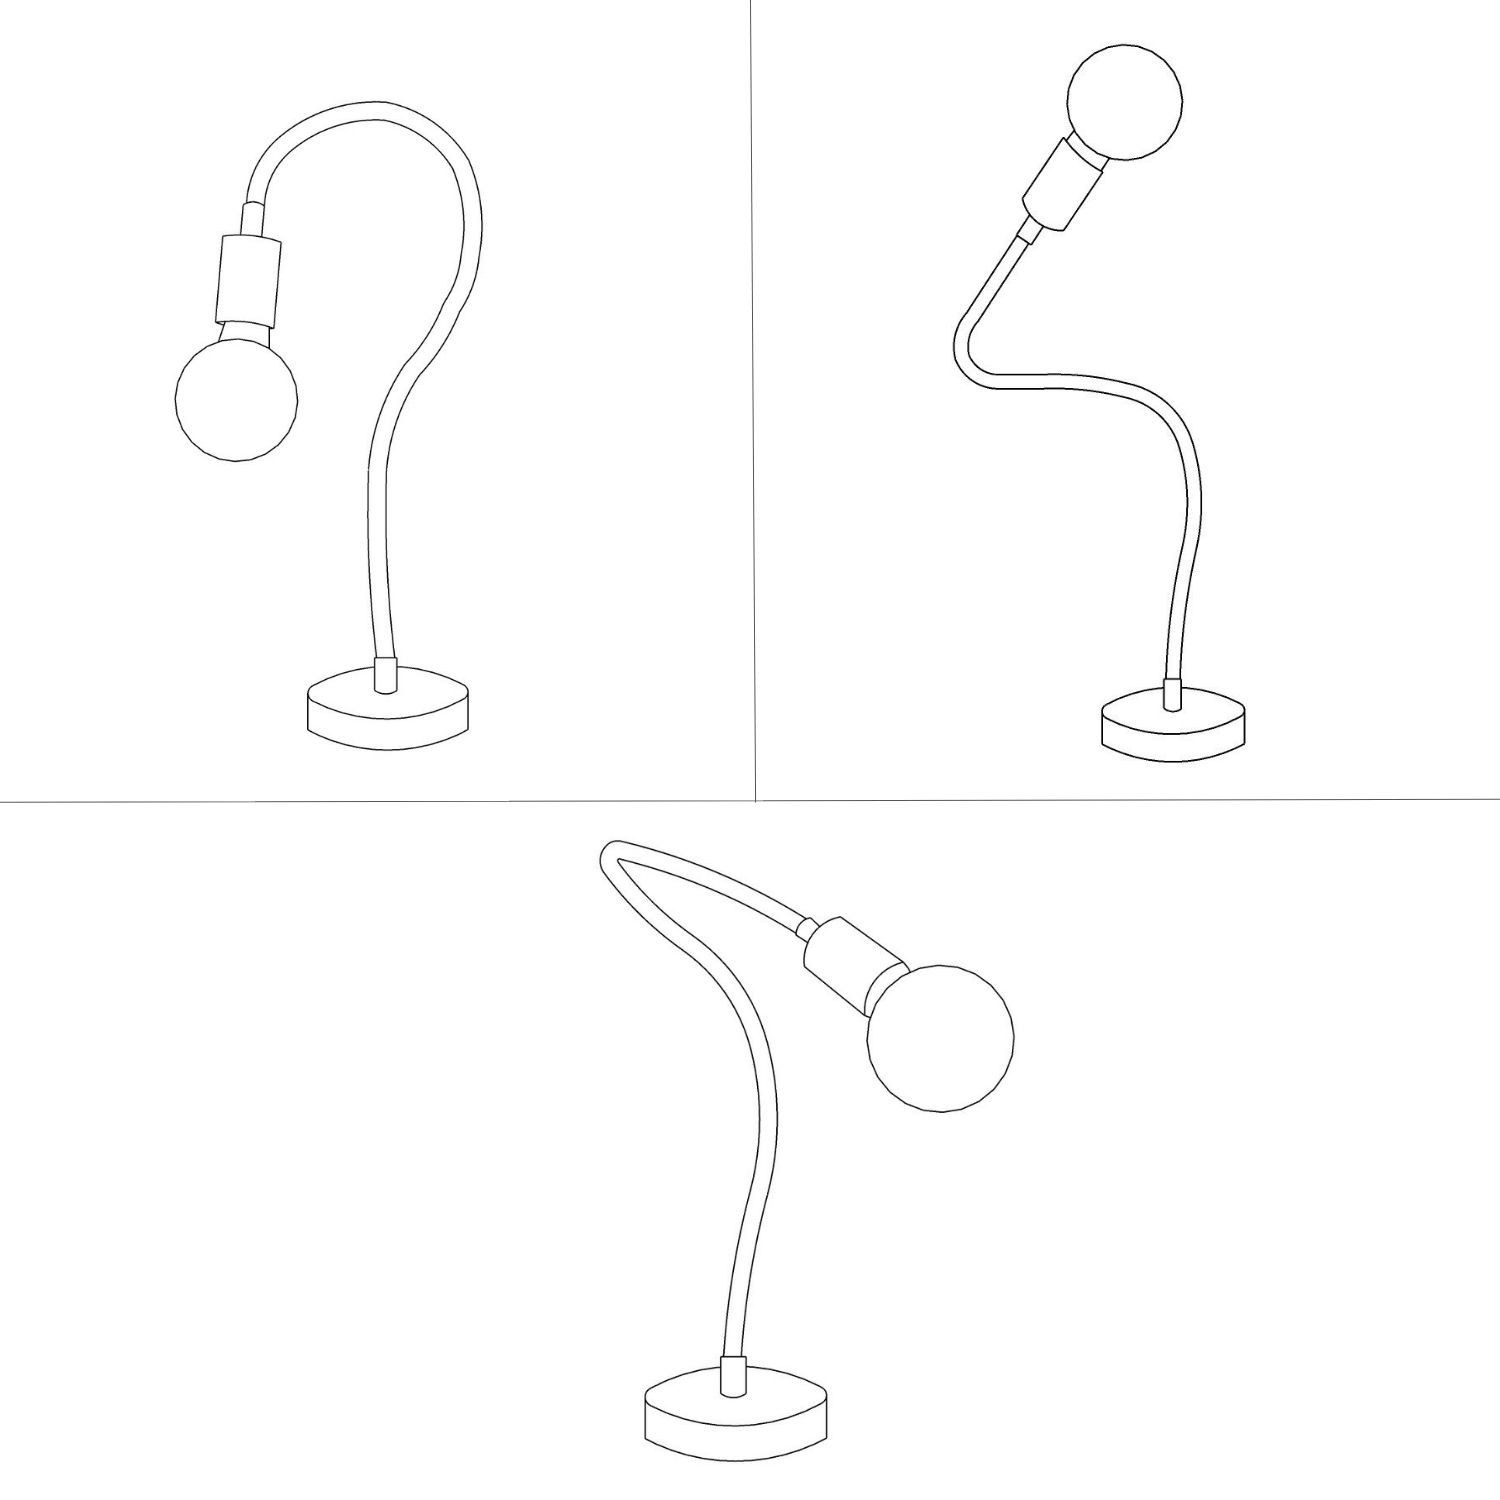 Flex flexible table lamp providing diffused light with 2-pin plug